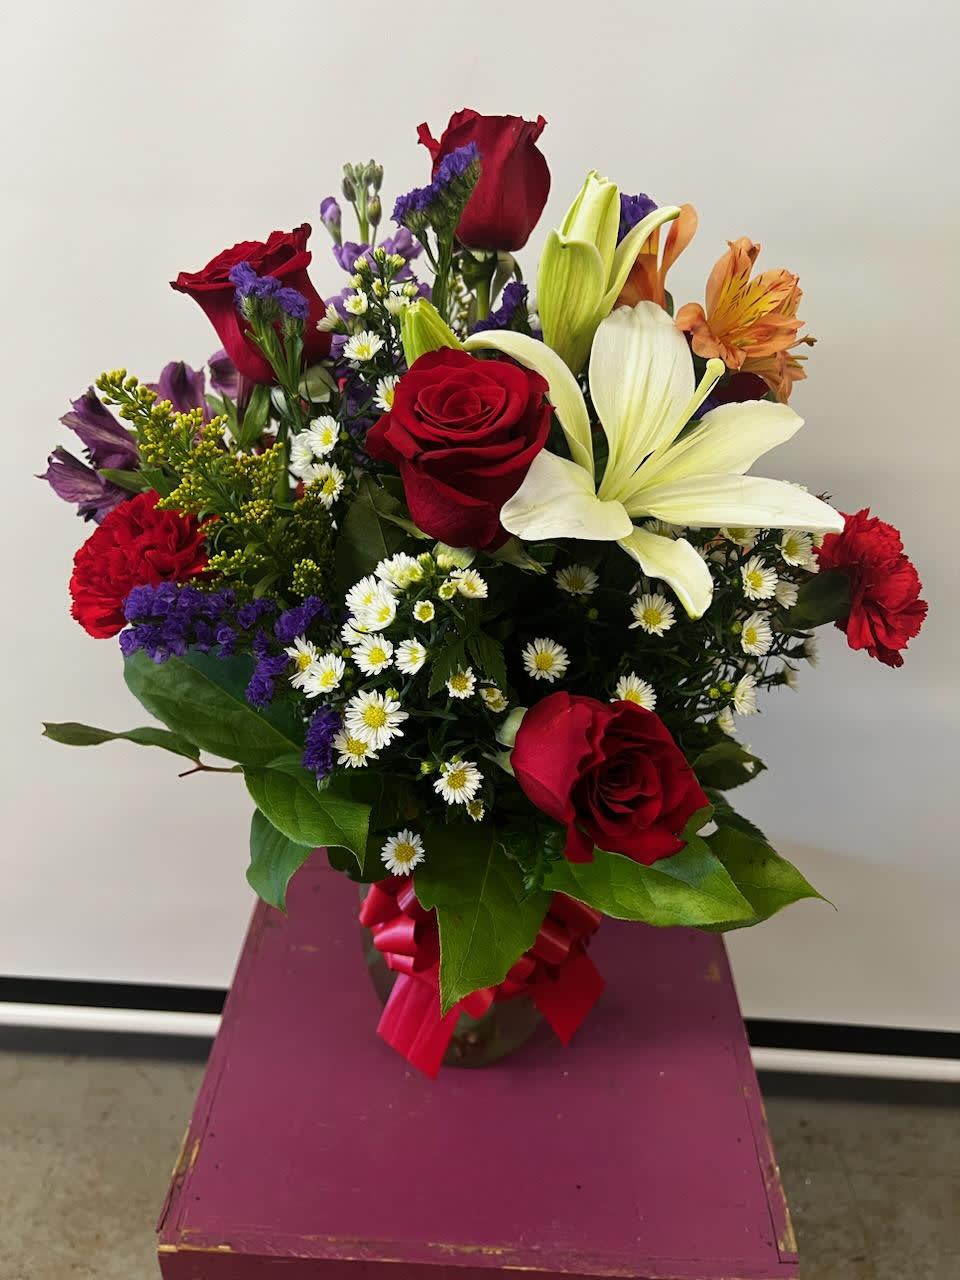 Just for you - Mix bouquet of fresh and scent flowers to make smile your special one. size and colors may vary.